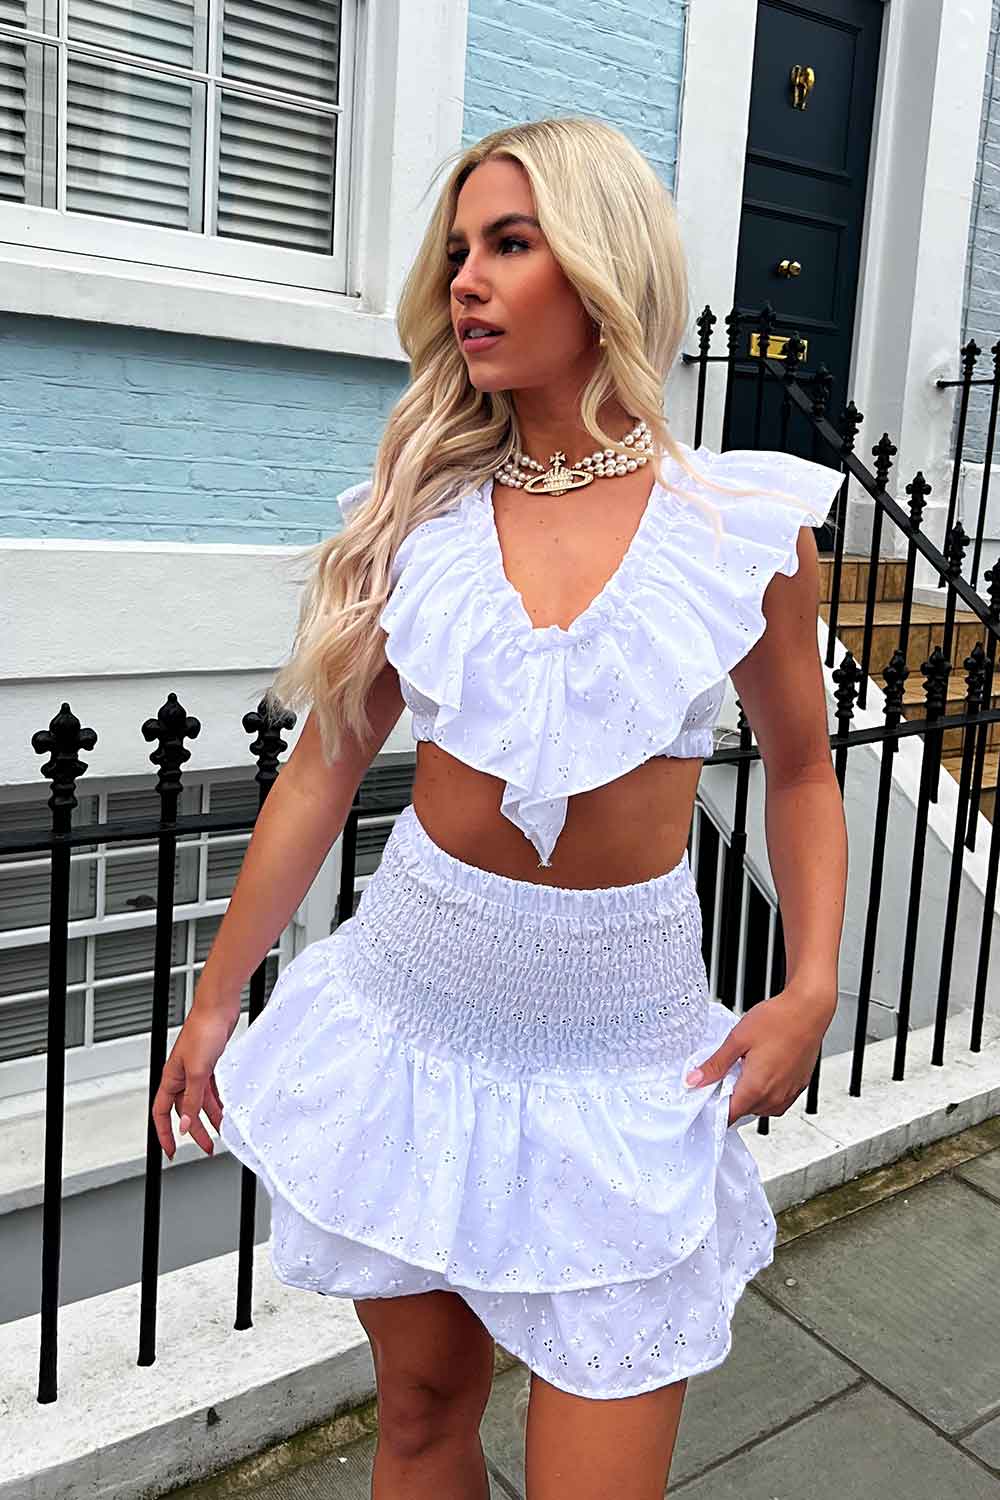 broderie anglaise rara frilly skirt and crop top co ord set uk 